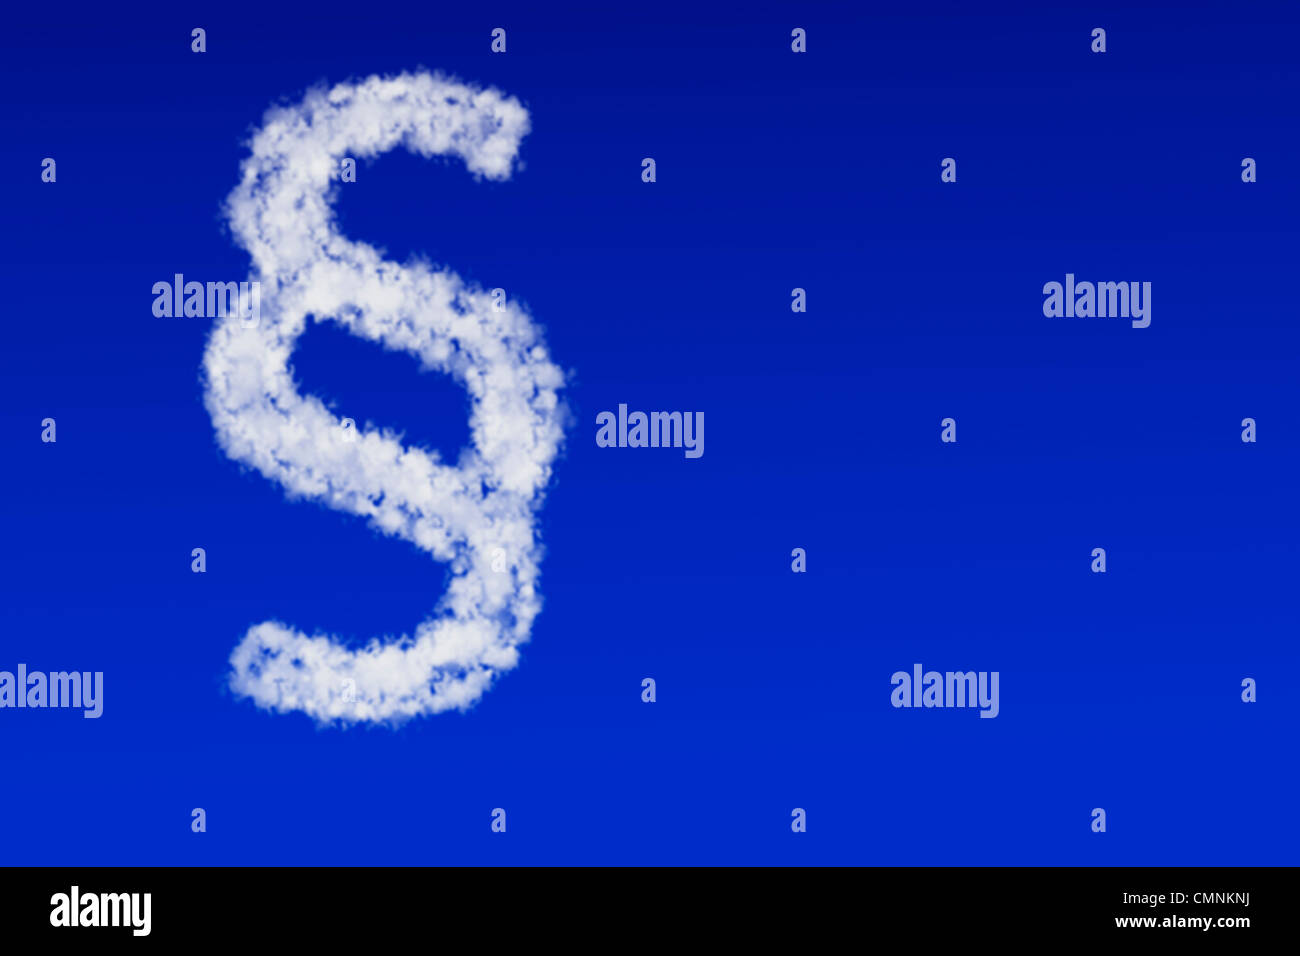 Clouds in the form of a Paragraph sign floating in the blue sky Stock Photo